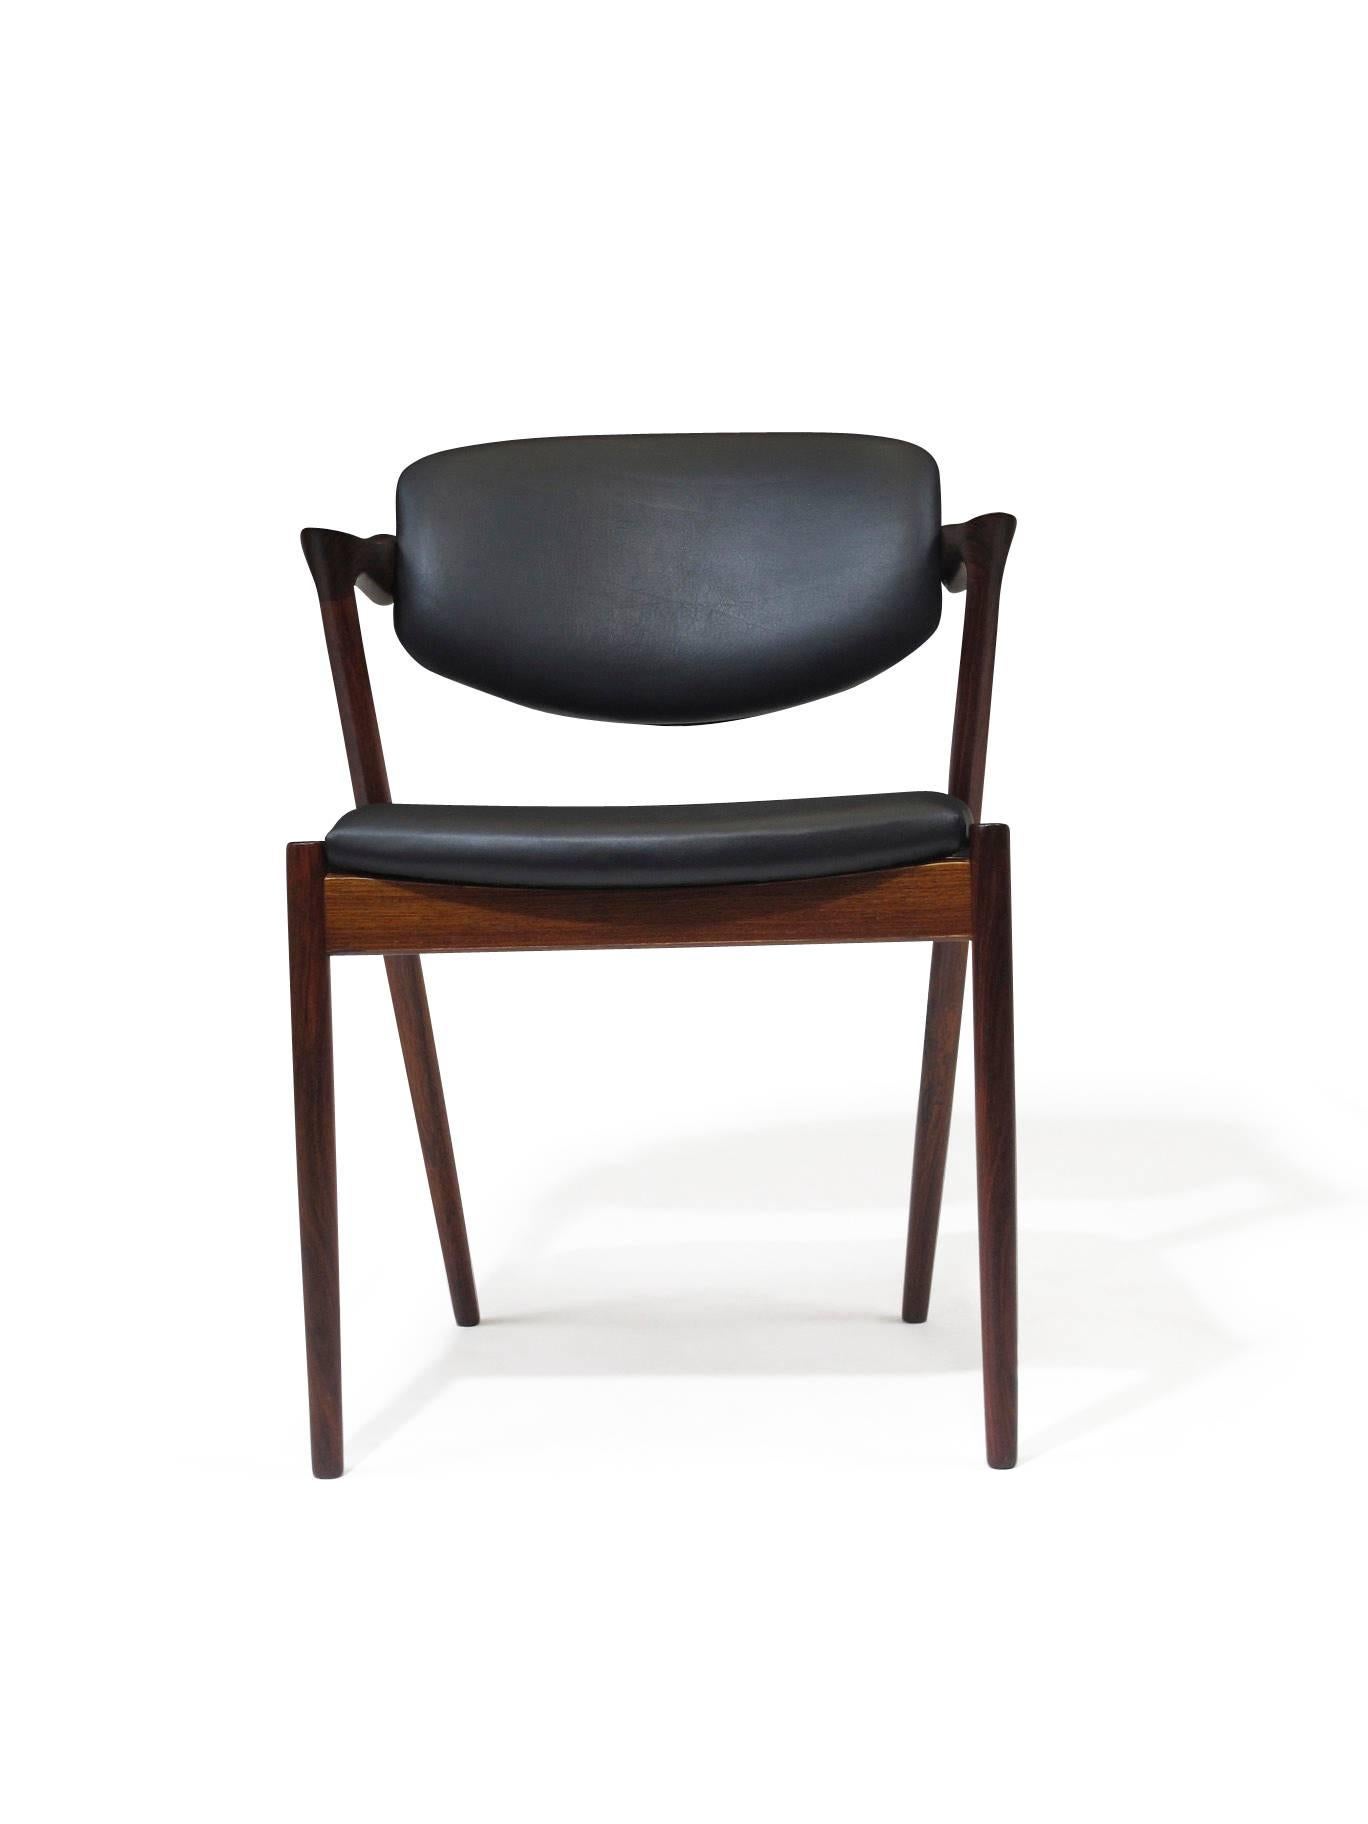 Kai Kristiansen, model #42 dining chairs for V. Schou Andersen crafted of dark Brazilian rosewood with tilting backrest and dramatic angled half armrest. Wood frame seat construction with new rubber straps covered in foam and new matte black